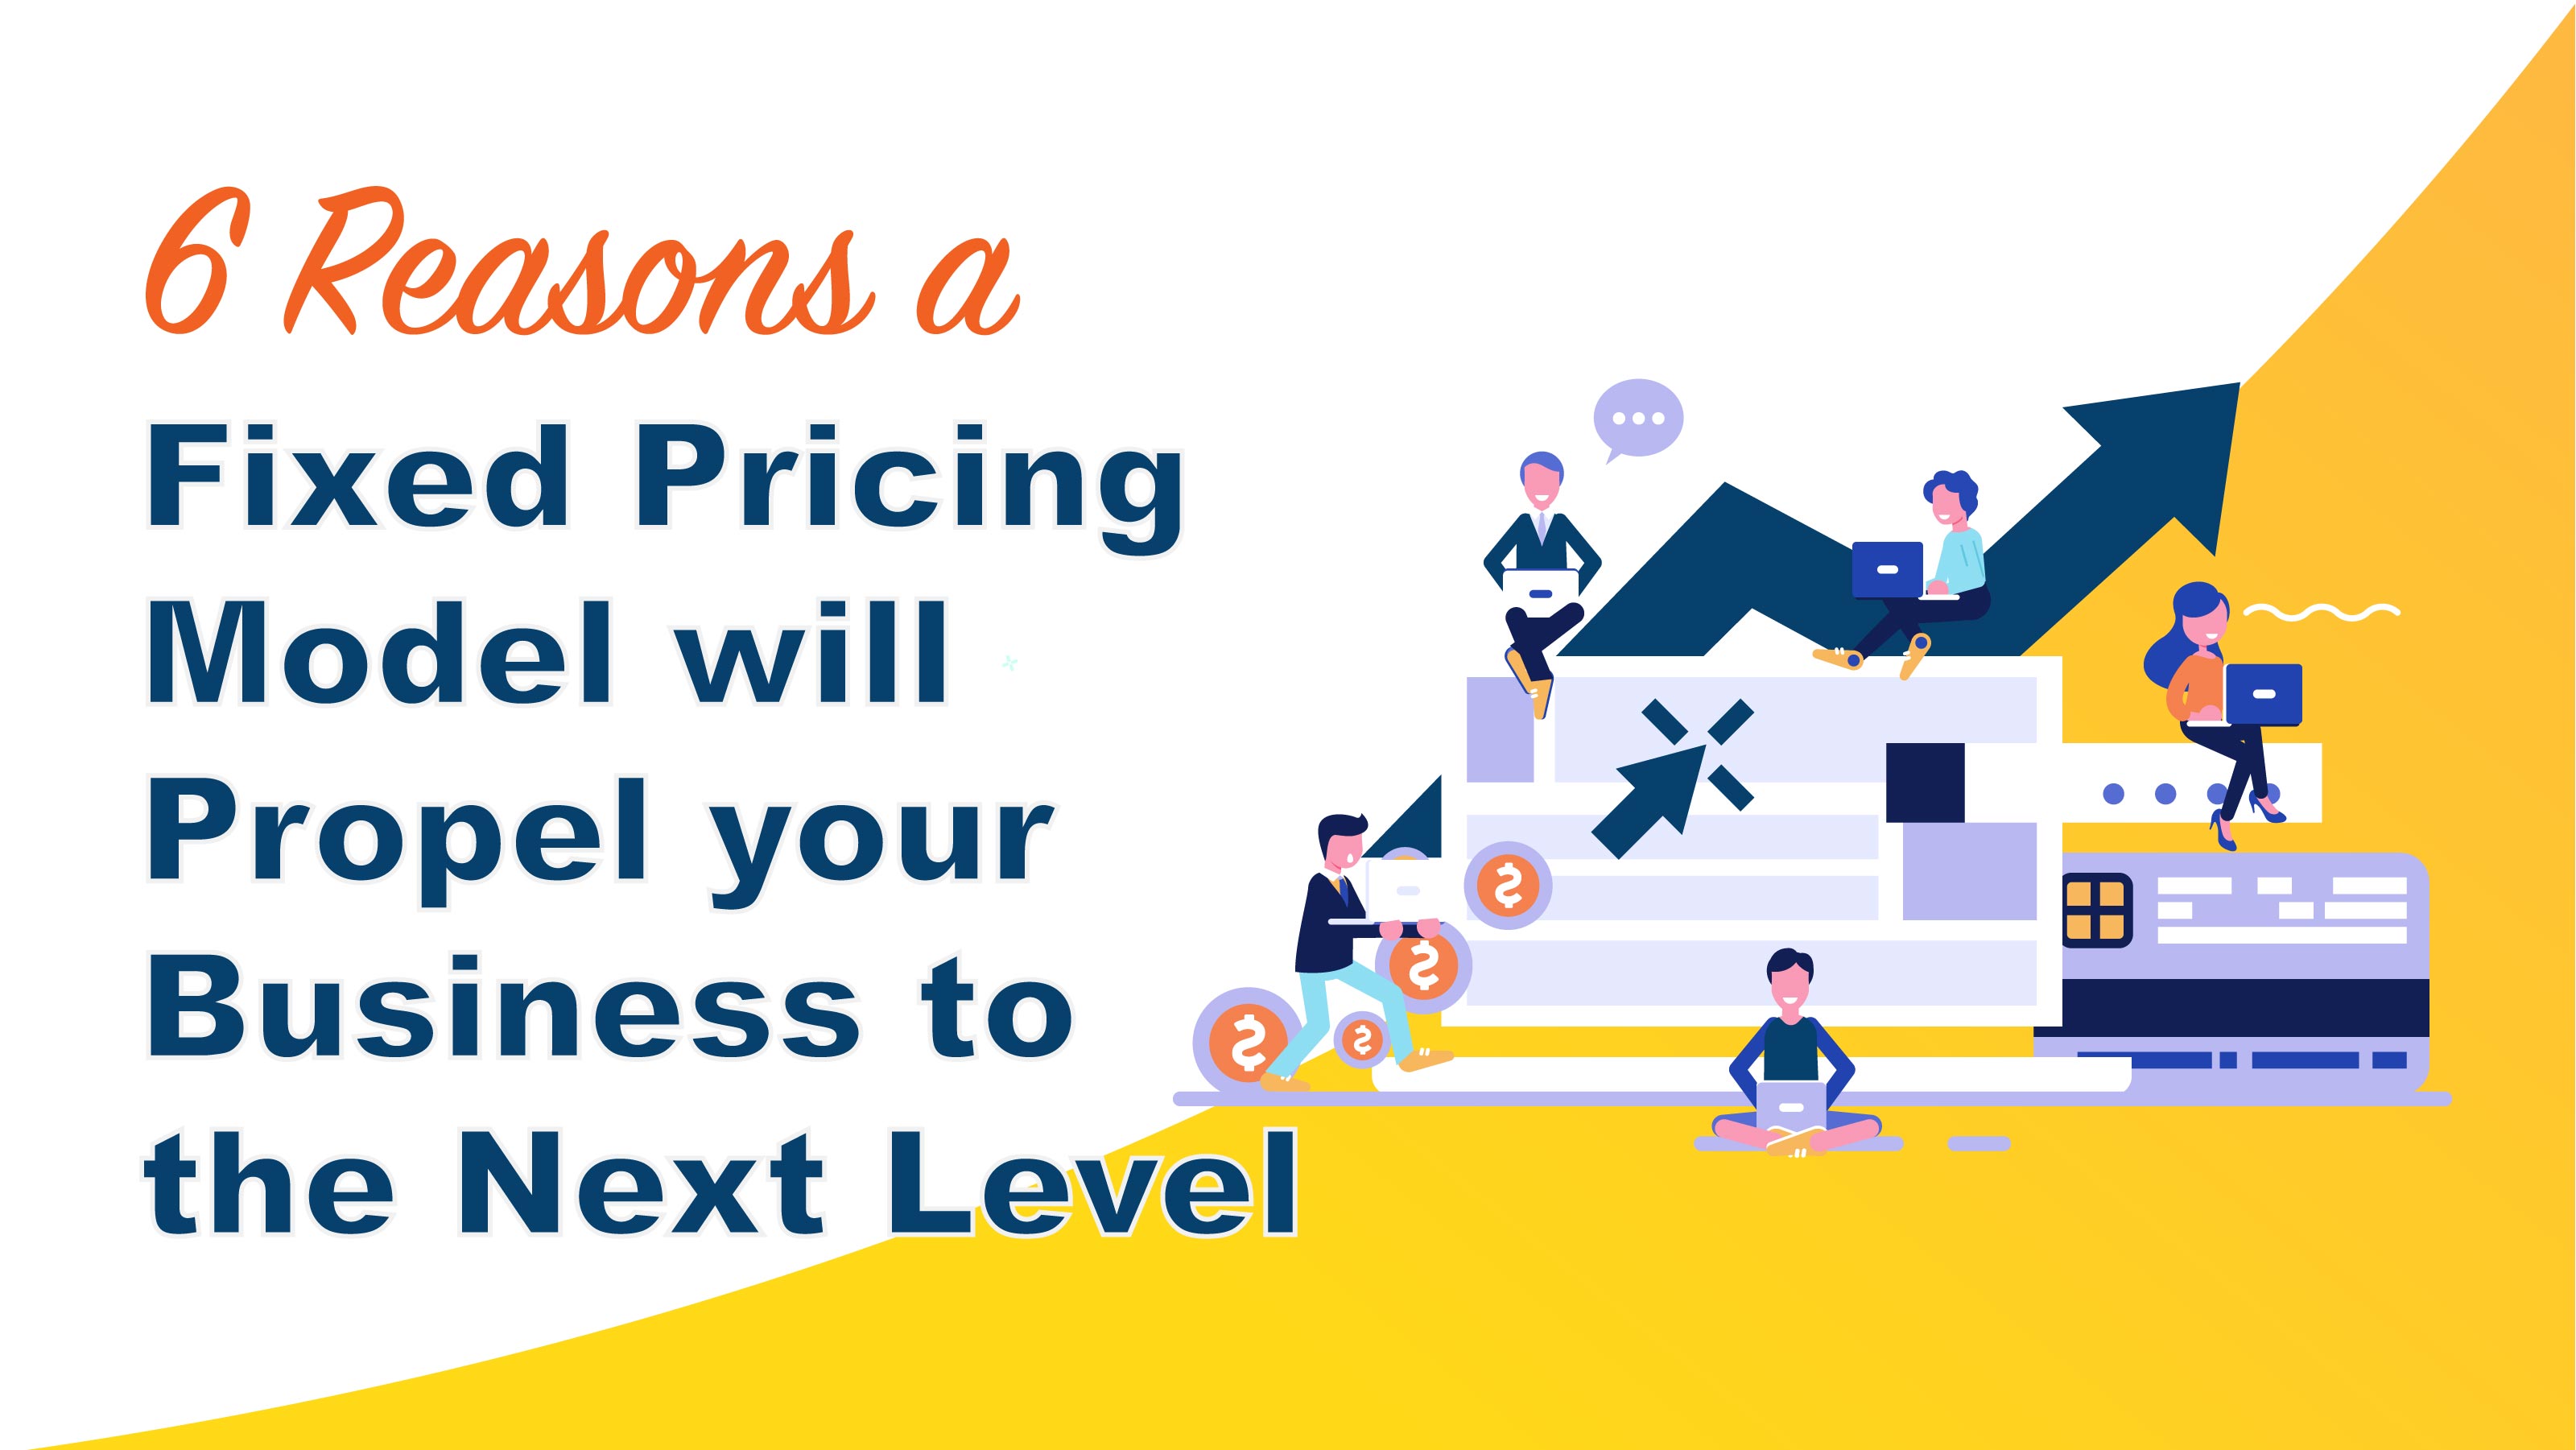 6 Reasons a Fixed Pricing Model will Propel your Business to the Next Level